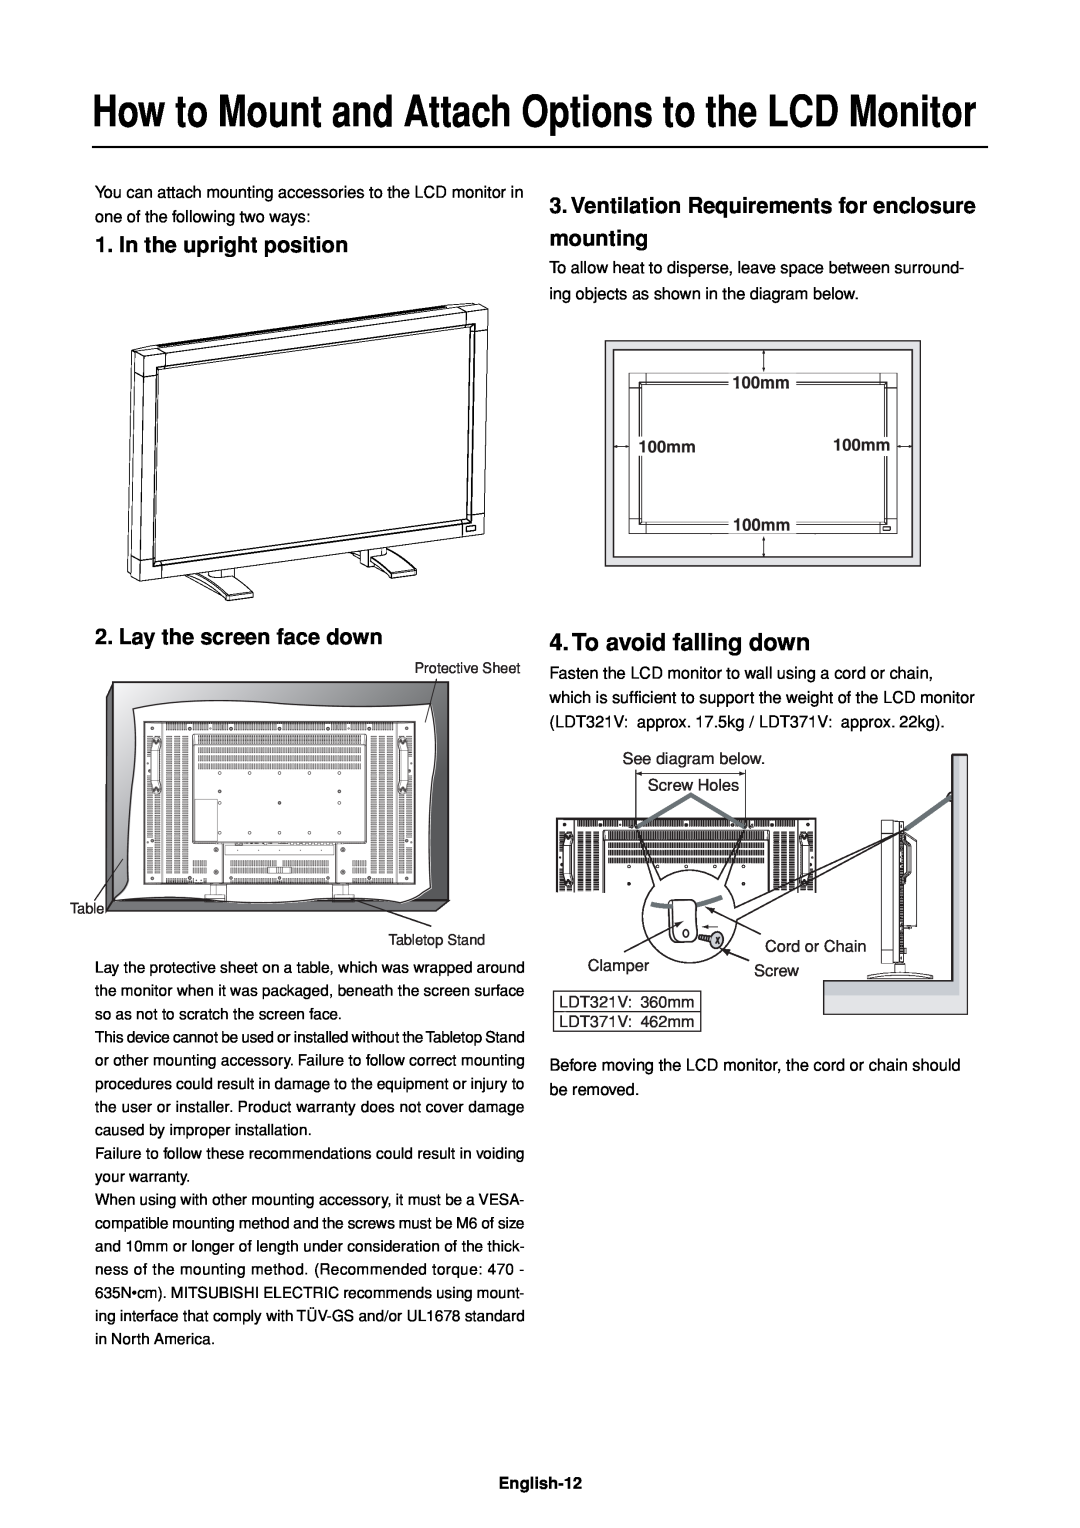 Mitsubishi Electronics LDT32IV (BH548) manual In the upright position 2. Lay the screen face down, To avoid falling down 